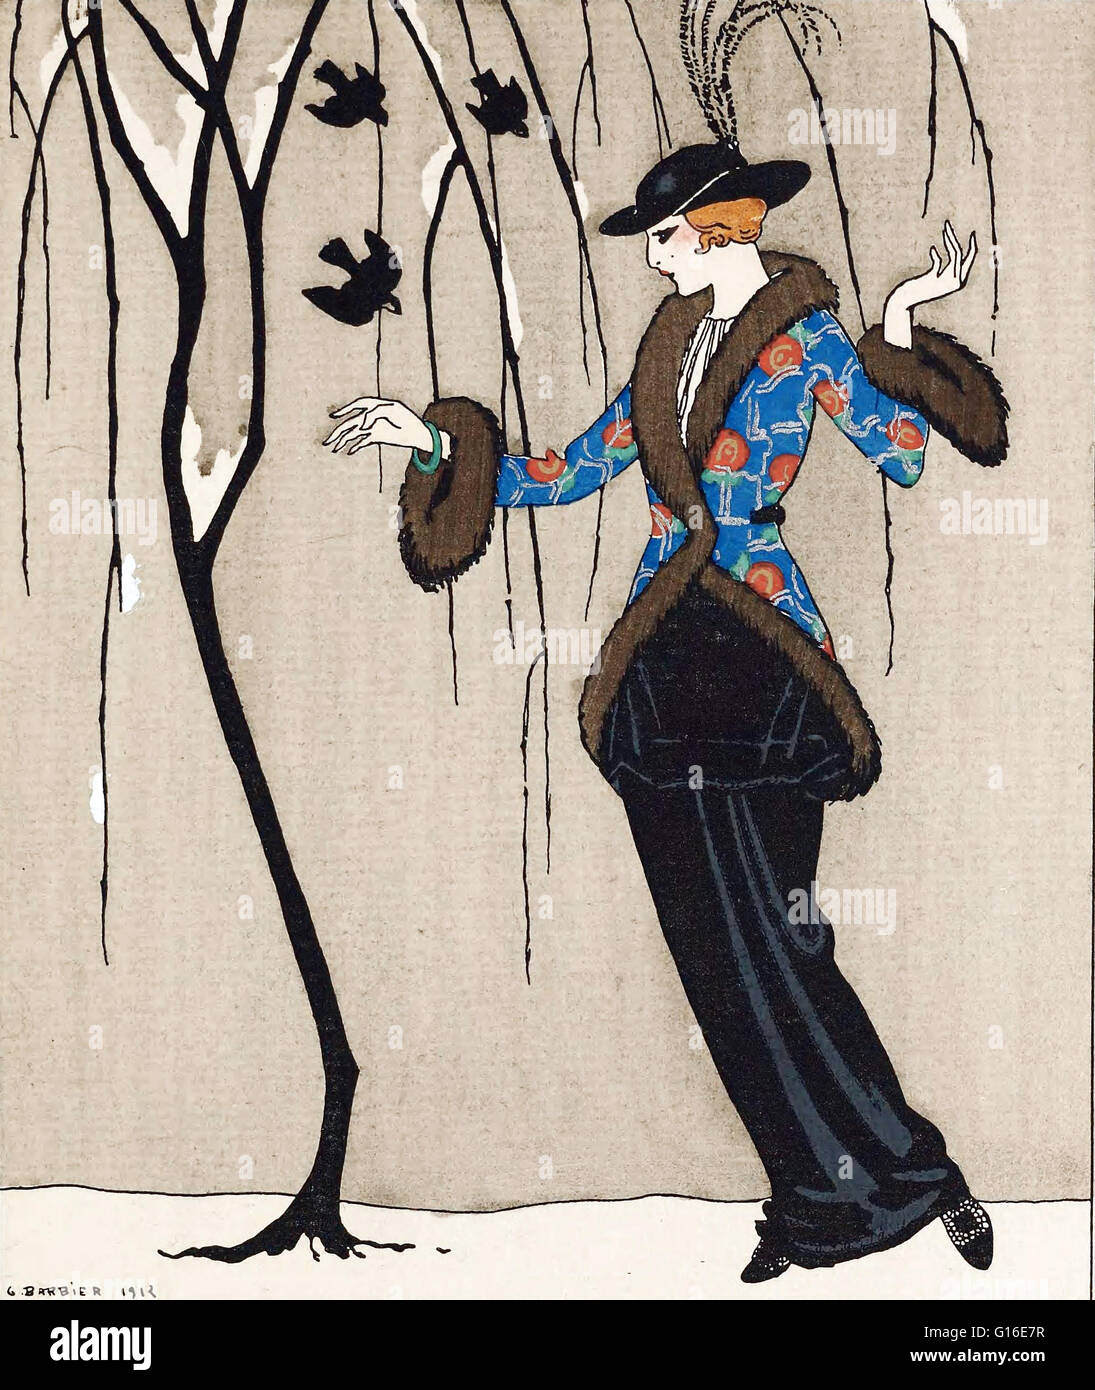 Entitled: 'Paquin dress illustration by George Barbier, 1912.' Jeanne Paquin (1869 - 1936) was a leading French fashion designer, known for her resolutely modern and innovative designs. She trained as a dressmaker at Rouff and later opened her own fashion Stock Photo